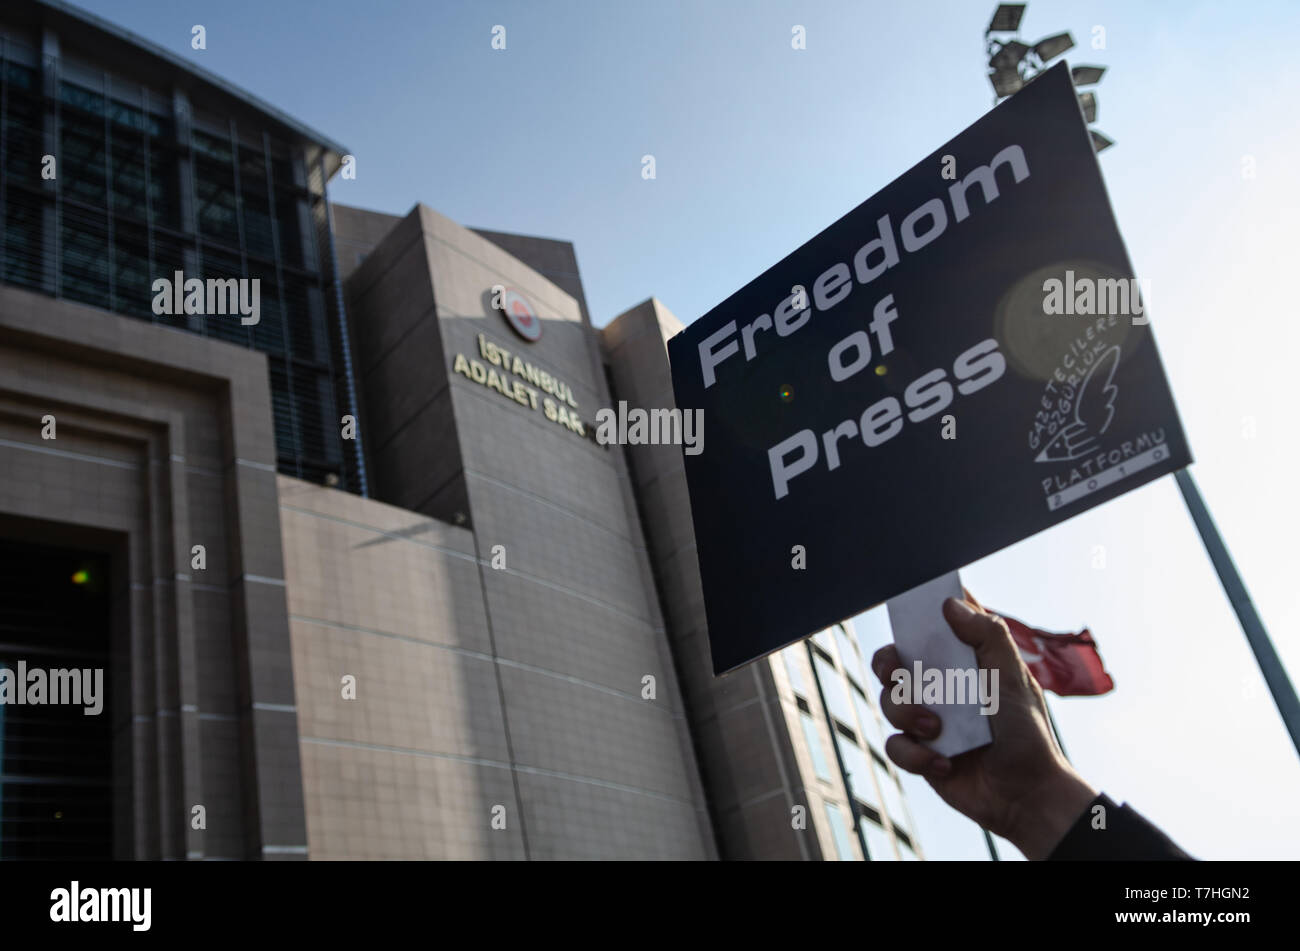 Protests calling for Freedom of the Press outside the Istanbul Court Building, Turkey Stock Photo